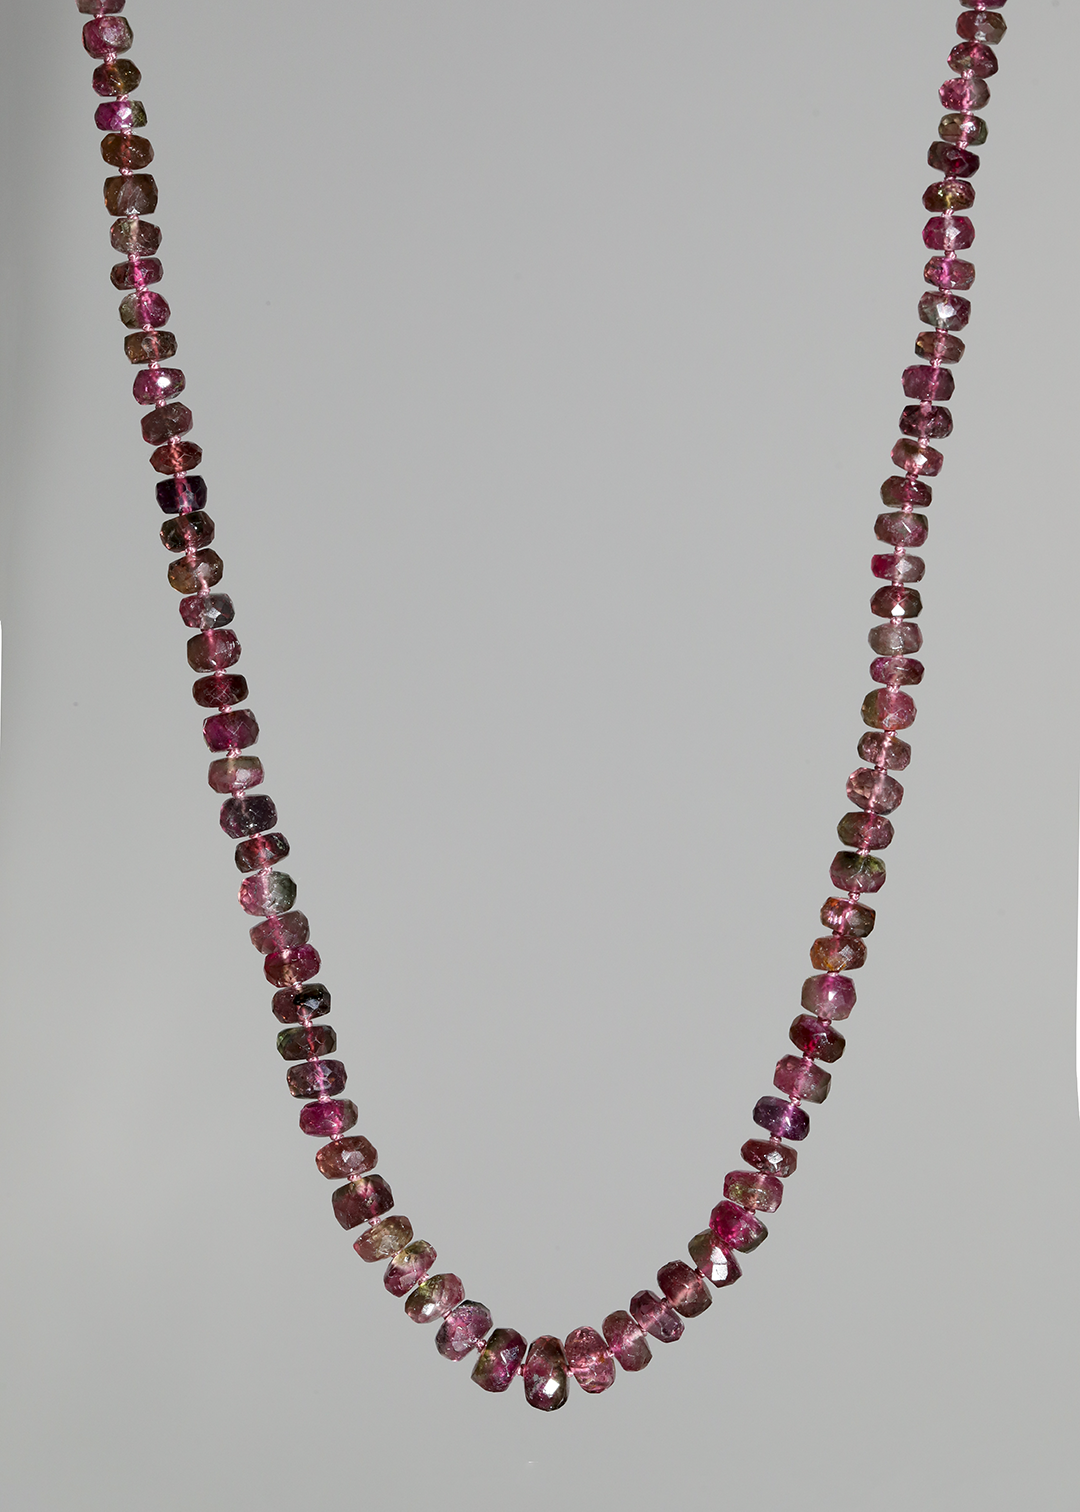 pink and green bicolor watermelon tourmaline bead necklace 14k solid gold clasp designer brittany myra jewelry candy bead necklace